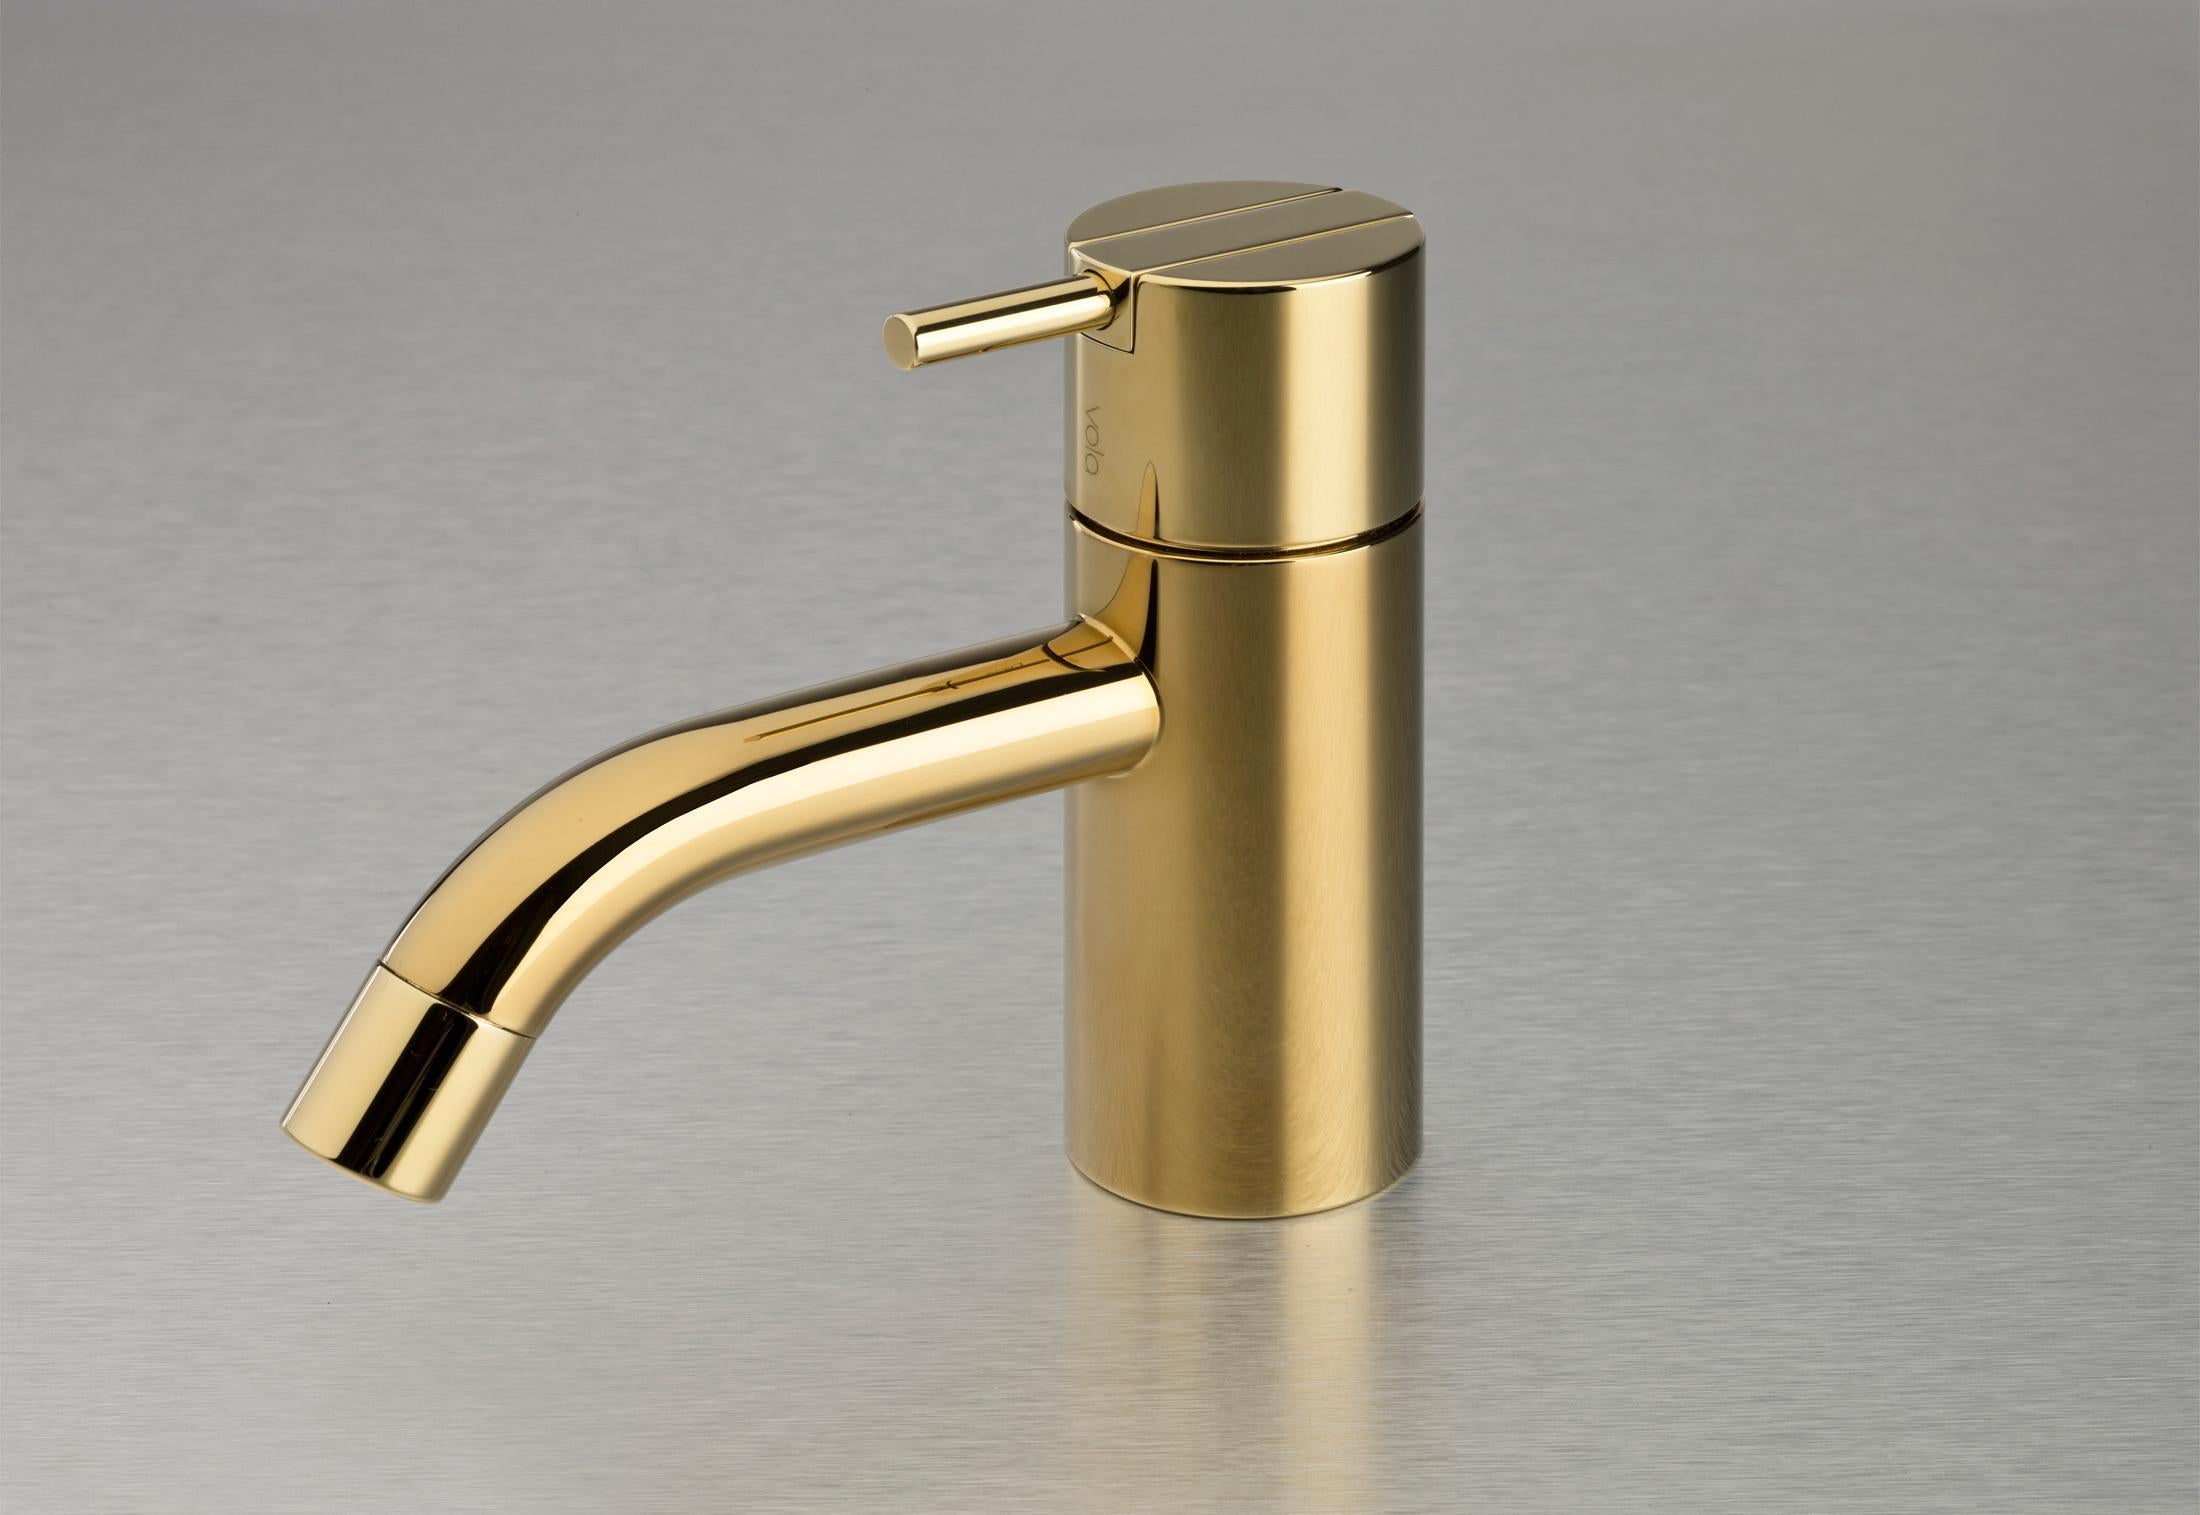 Arne Jacobsen Vola basin Faucet, natural brass, HV1-19 -03 minimal bath fixture. In box. Never installed. MSRP of the HV1-19 (Natural Brass) is approximately 1300 USD. Iconic mid-century design and a triumph of Scandinavian modernism. Natural Brass